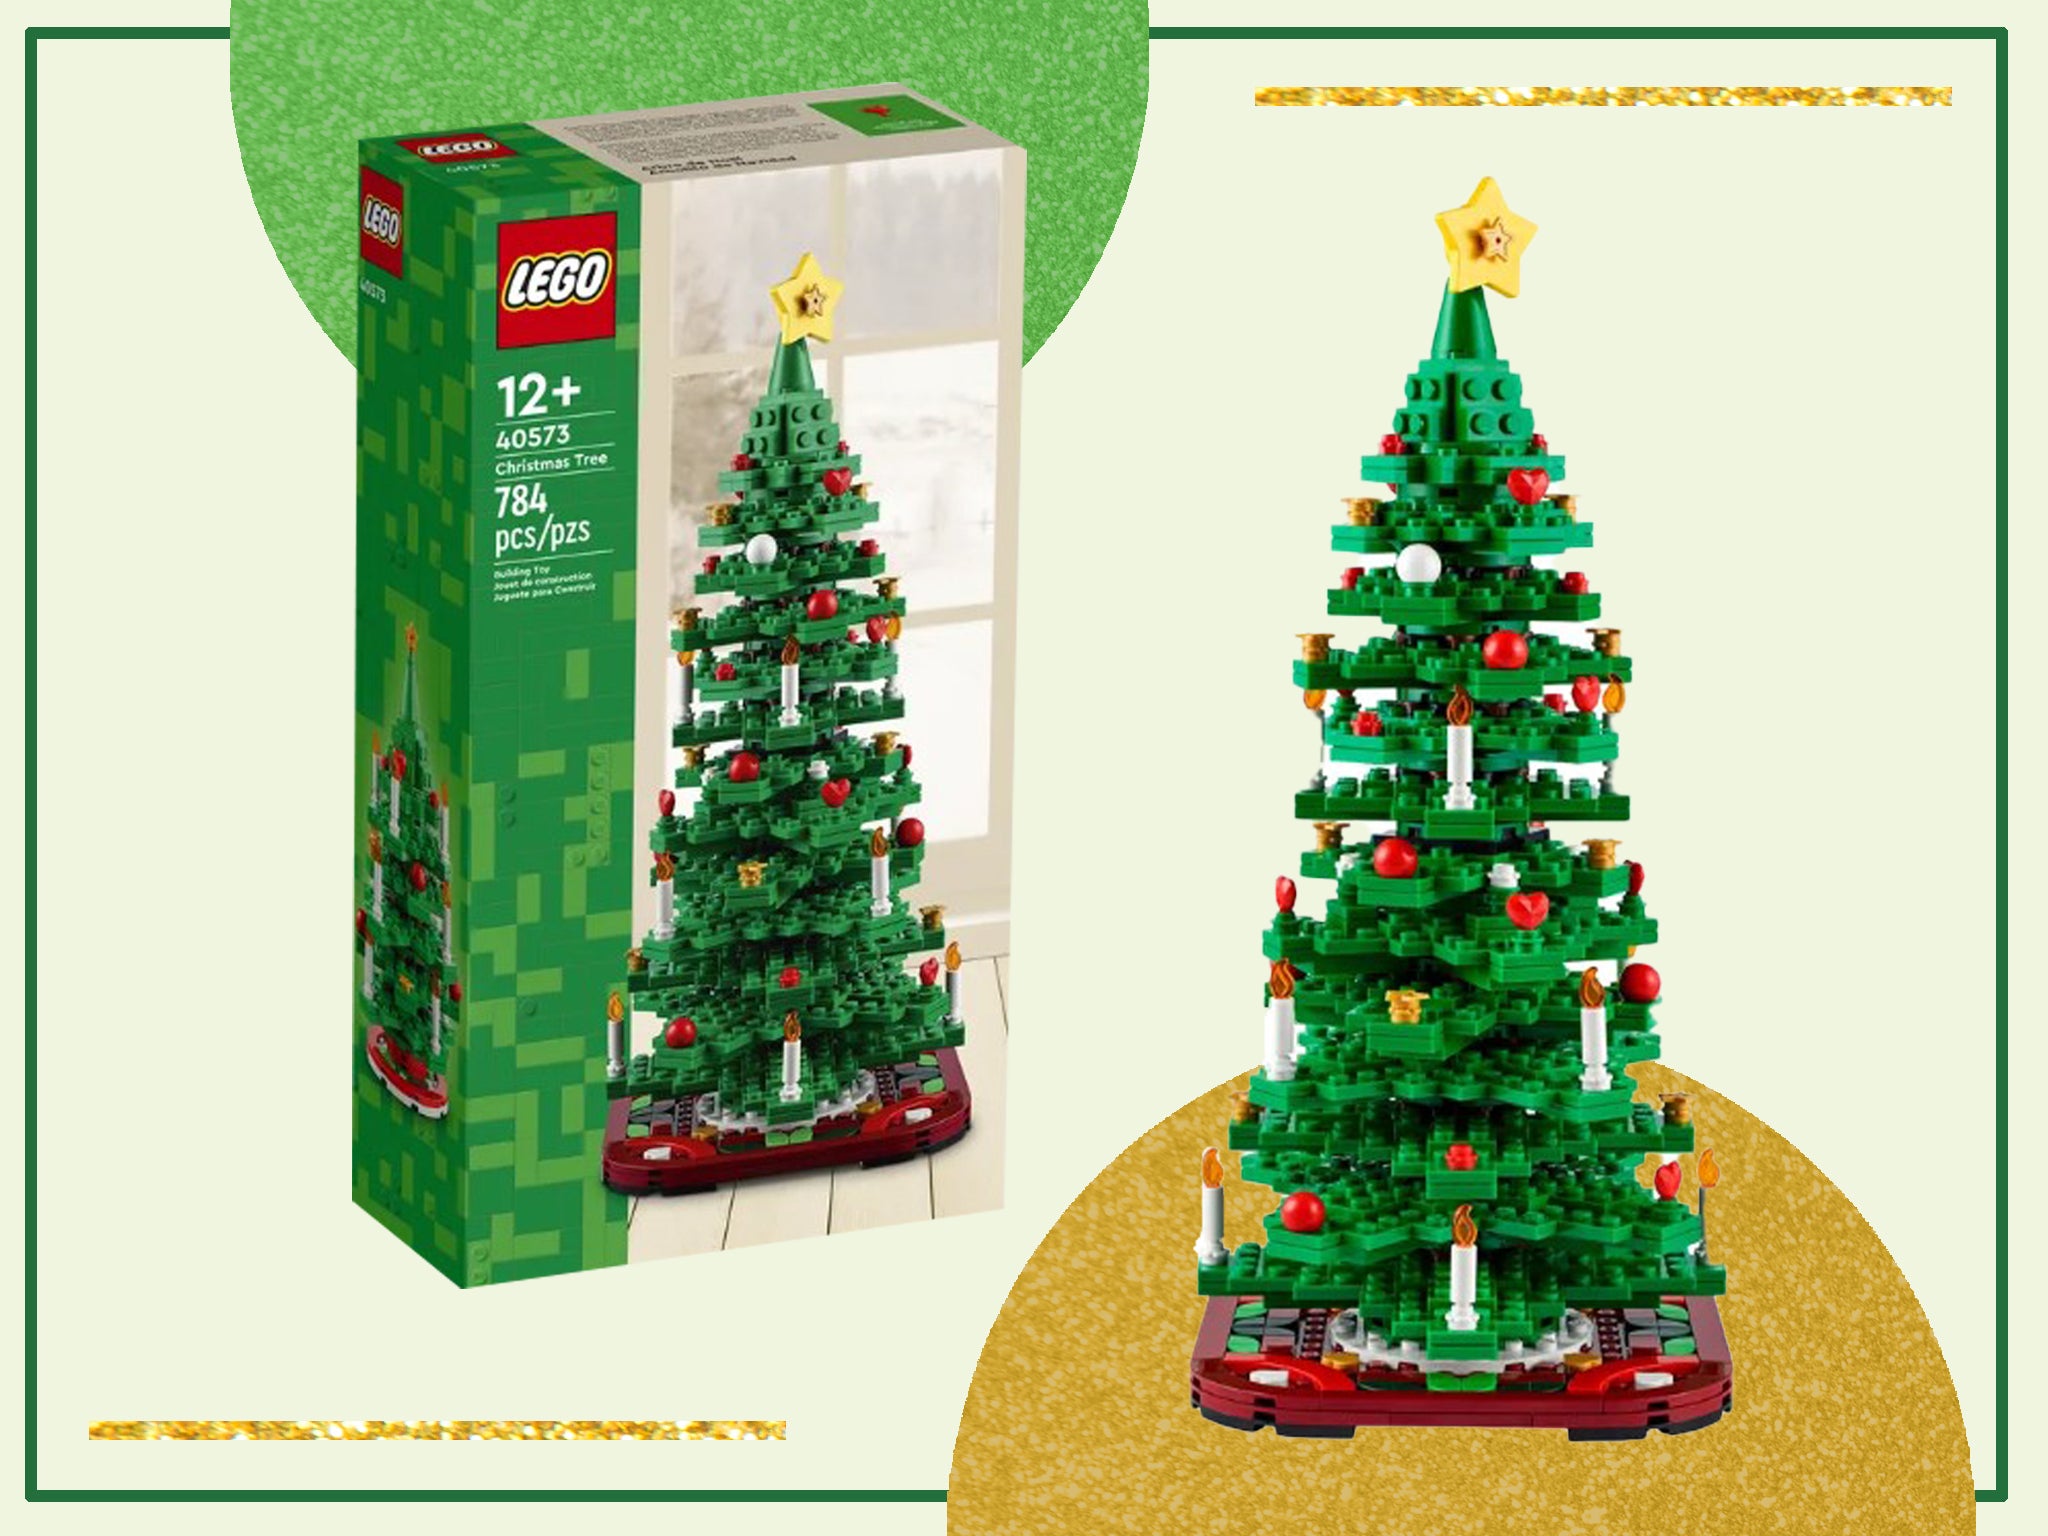 Lego’s Christmas tree is a must-have decorative build for 2022 – and it’s only £40